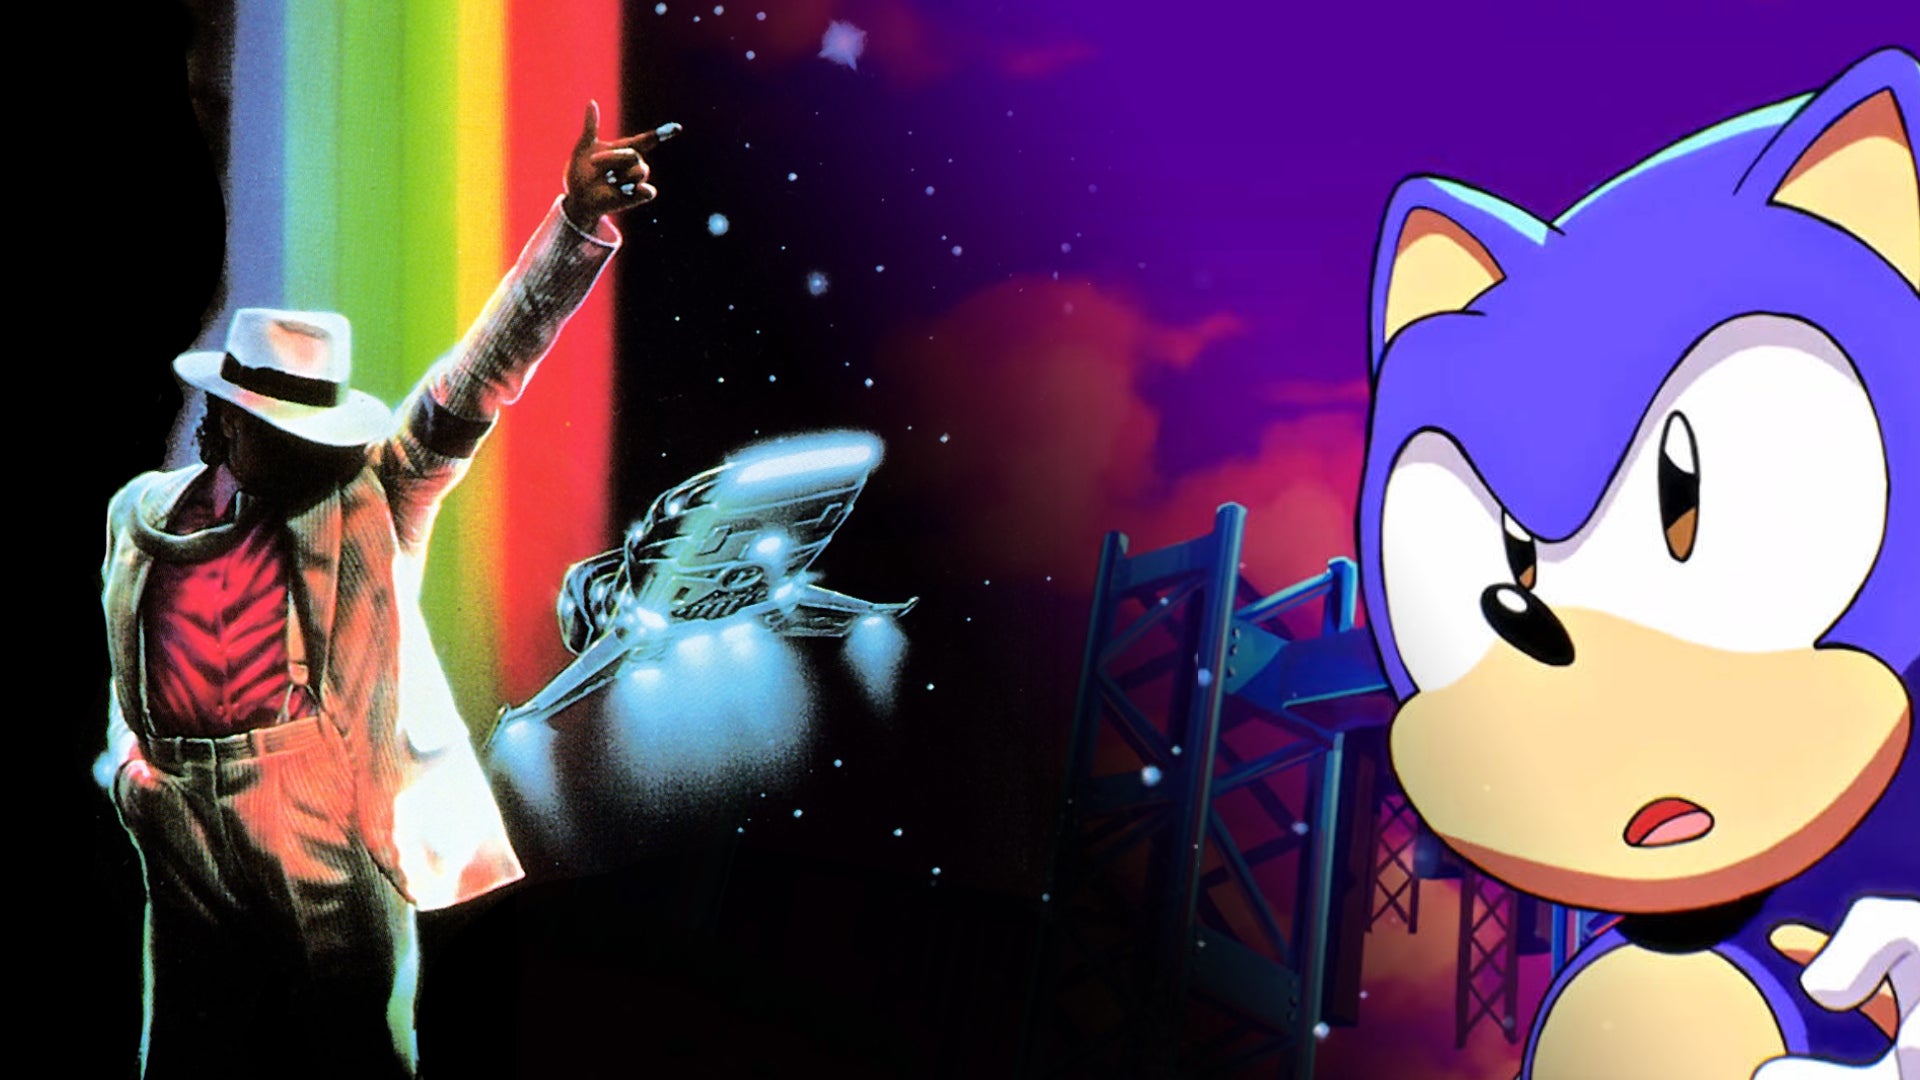 Image for Sega confirms Sonic 3 won’t have its original music in Sonic Origins. Here’s what will be missing, and why